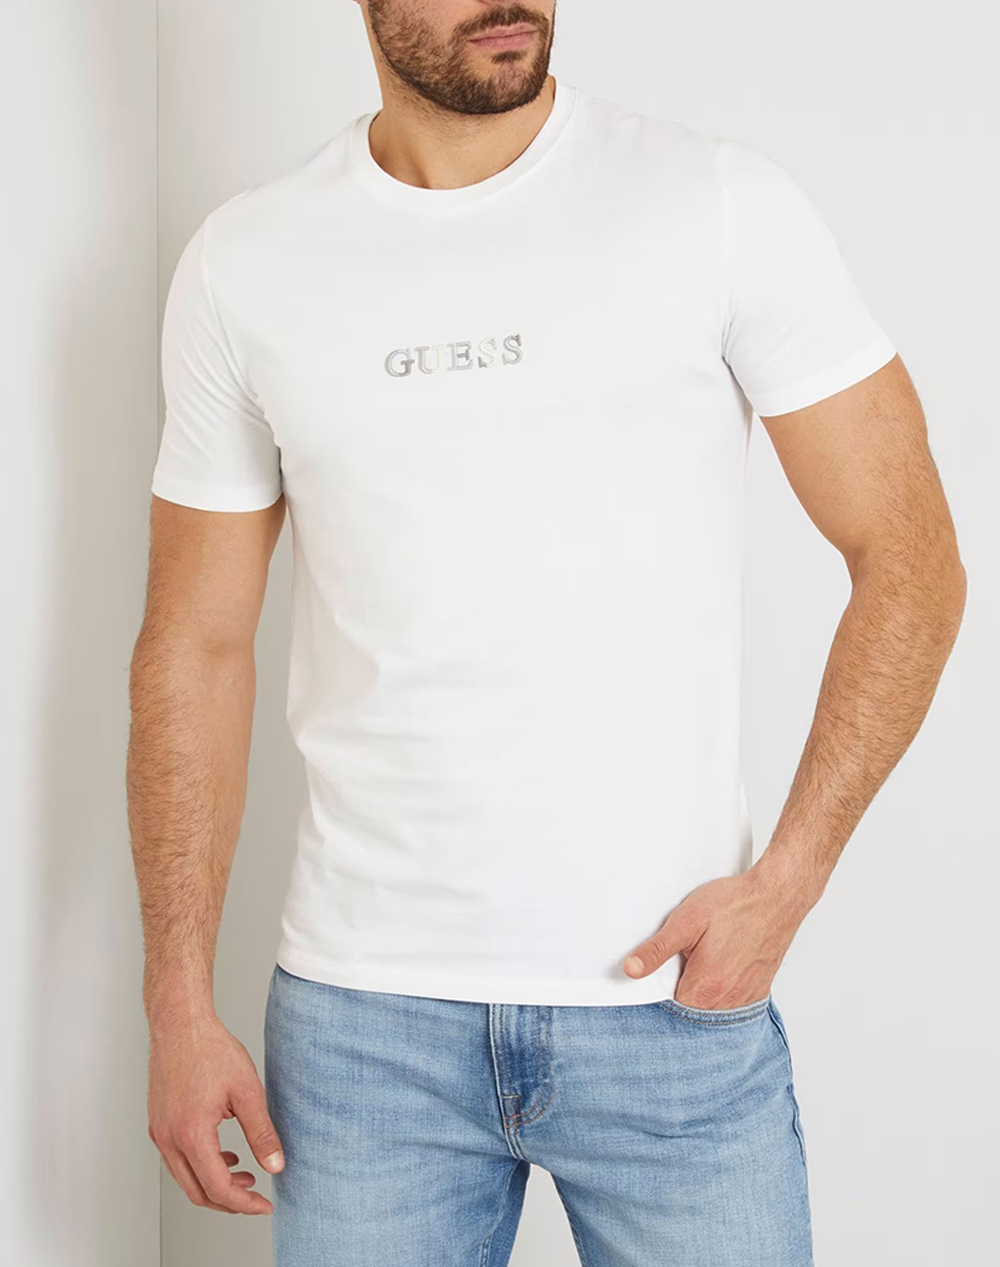 GUESS SS CN GUESS MULTICOLOR TEE ΜΠΛΟΥΖΑ ΑΝΔΡΙΚΟ M4GI92I3Z14-G011 White